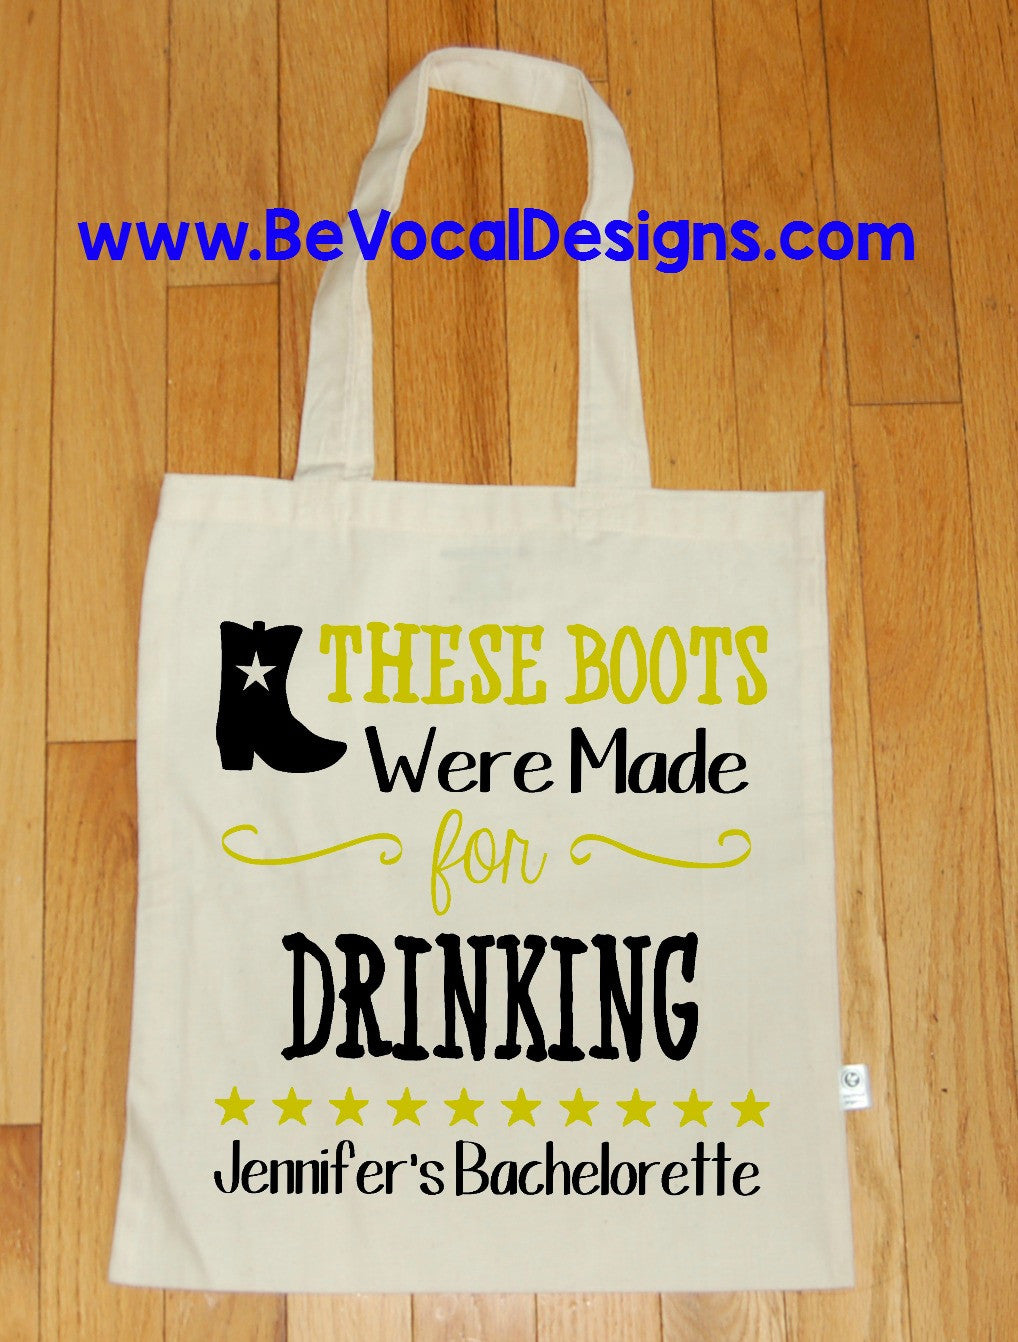 These Boots Were Made for DRINKING/WALKING DOWN THE AISLE Bachelorette Party Organic Tote Bag - Be Vocal Designs